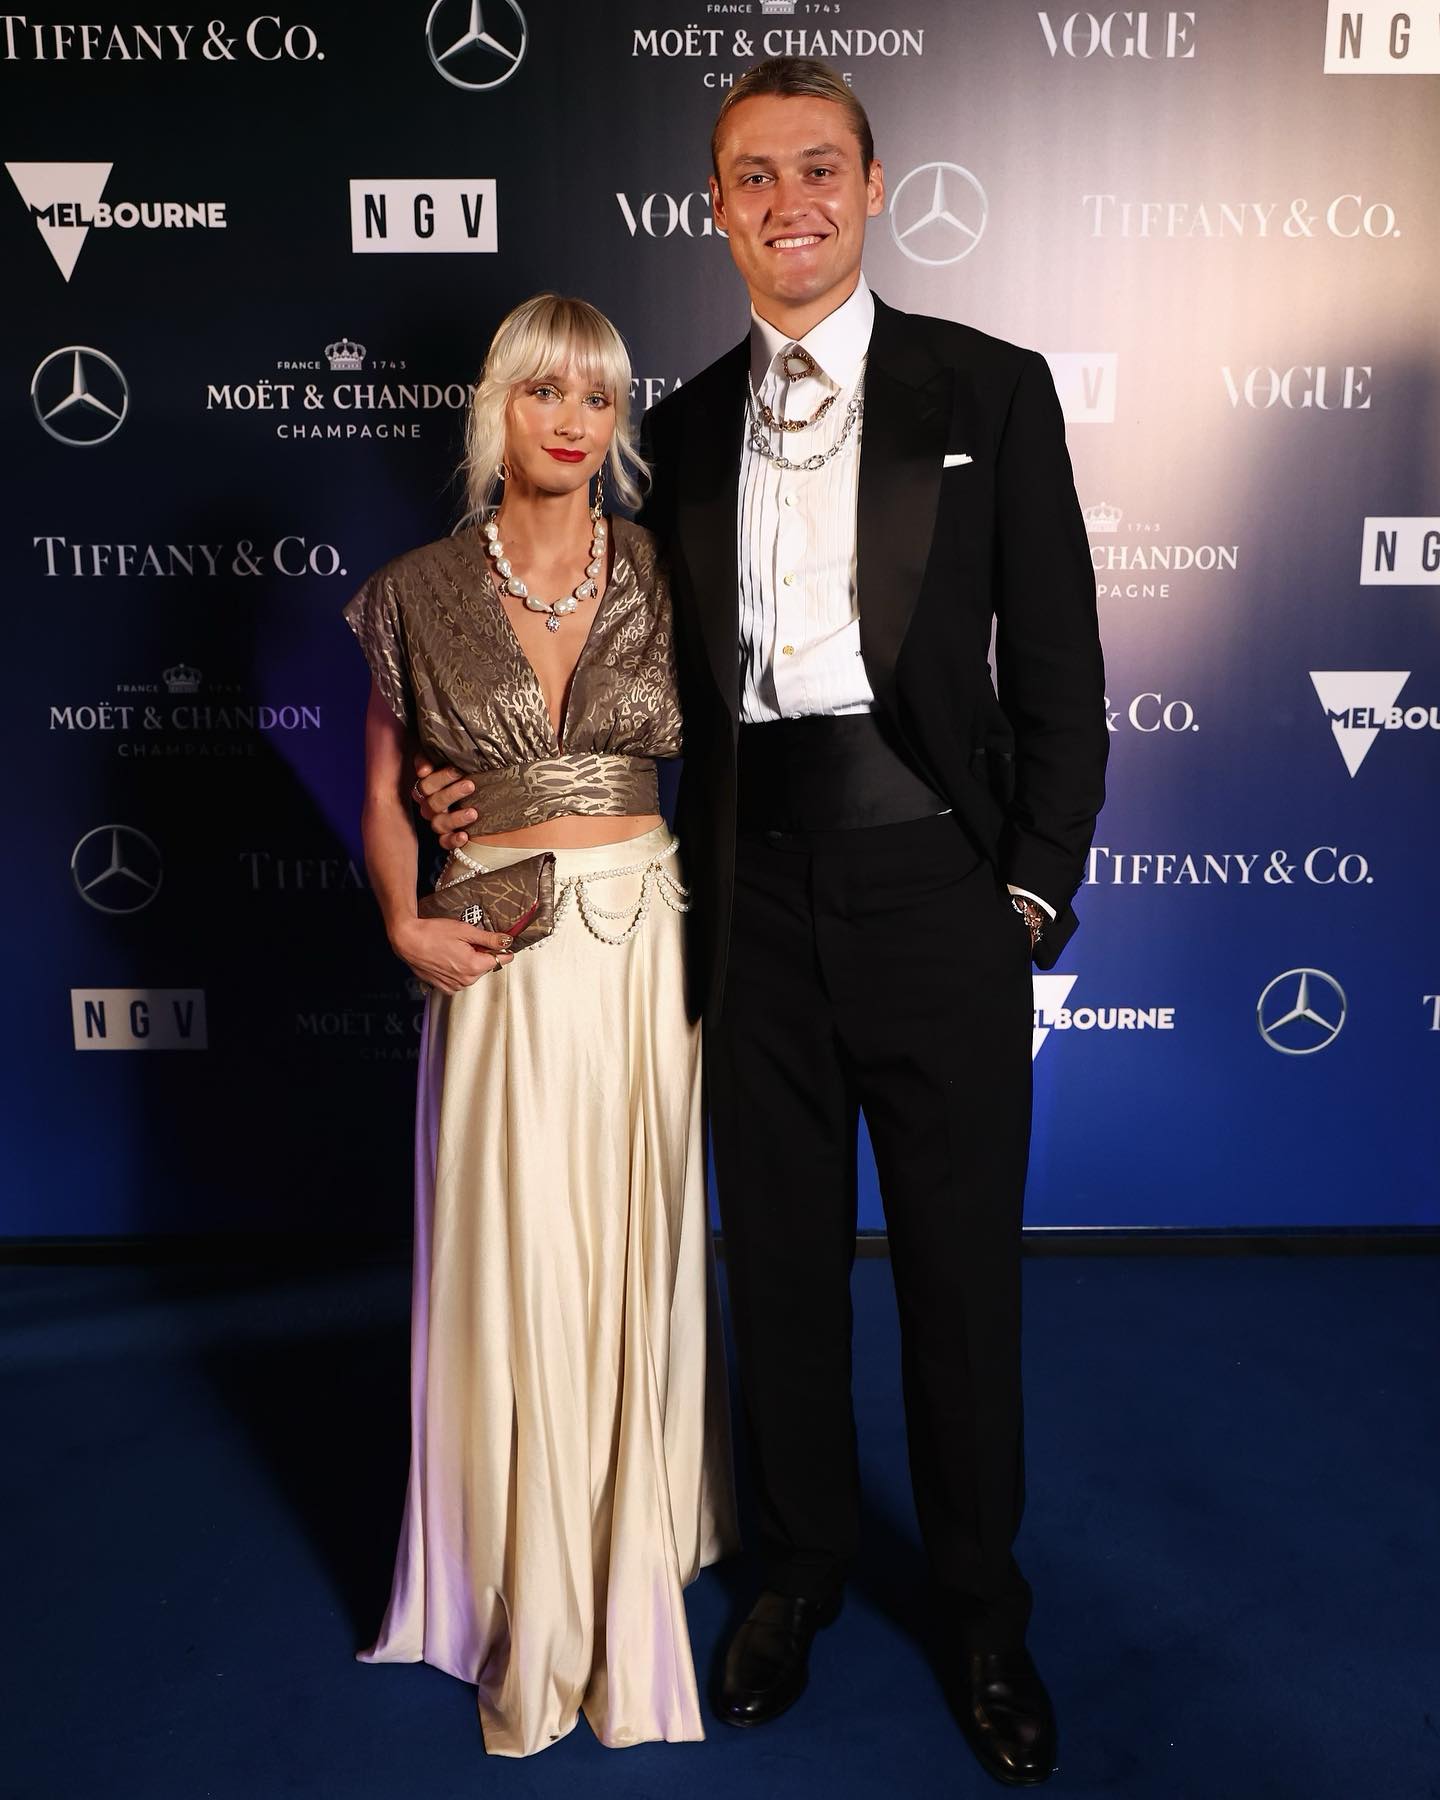 Darcy and Dee in NGV Gala